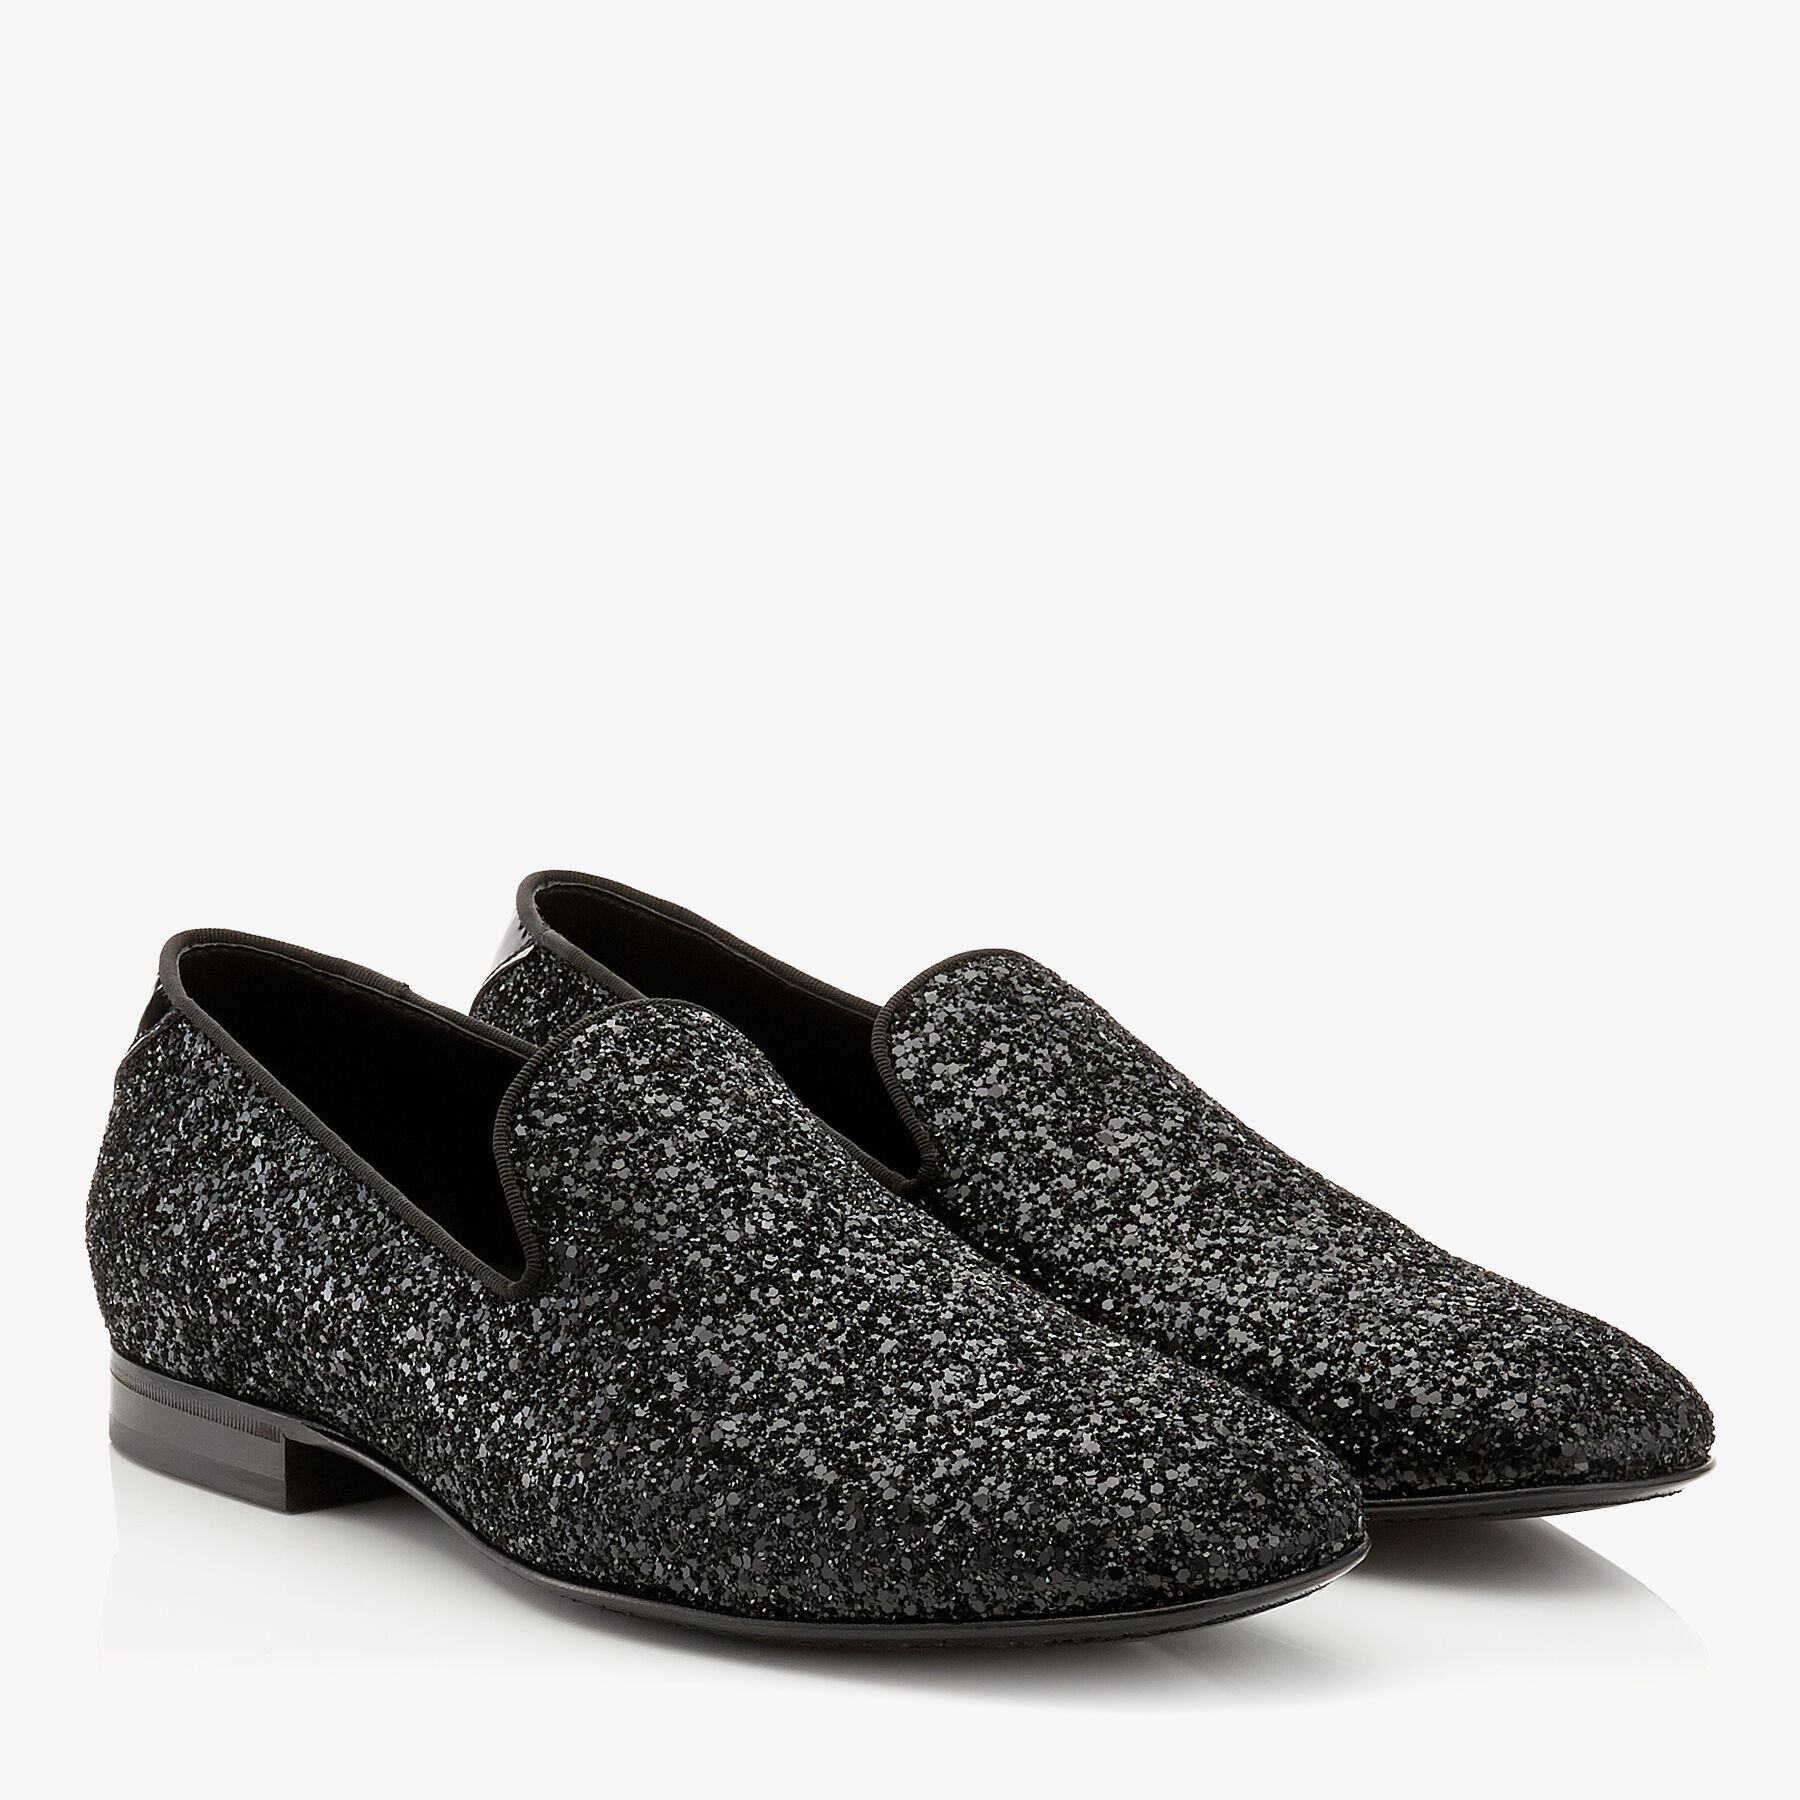 Jimmy Choo Leather Thame Loafers in Black for Men Mens Shoes Slip-on shoes Loafers 